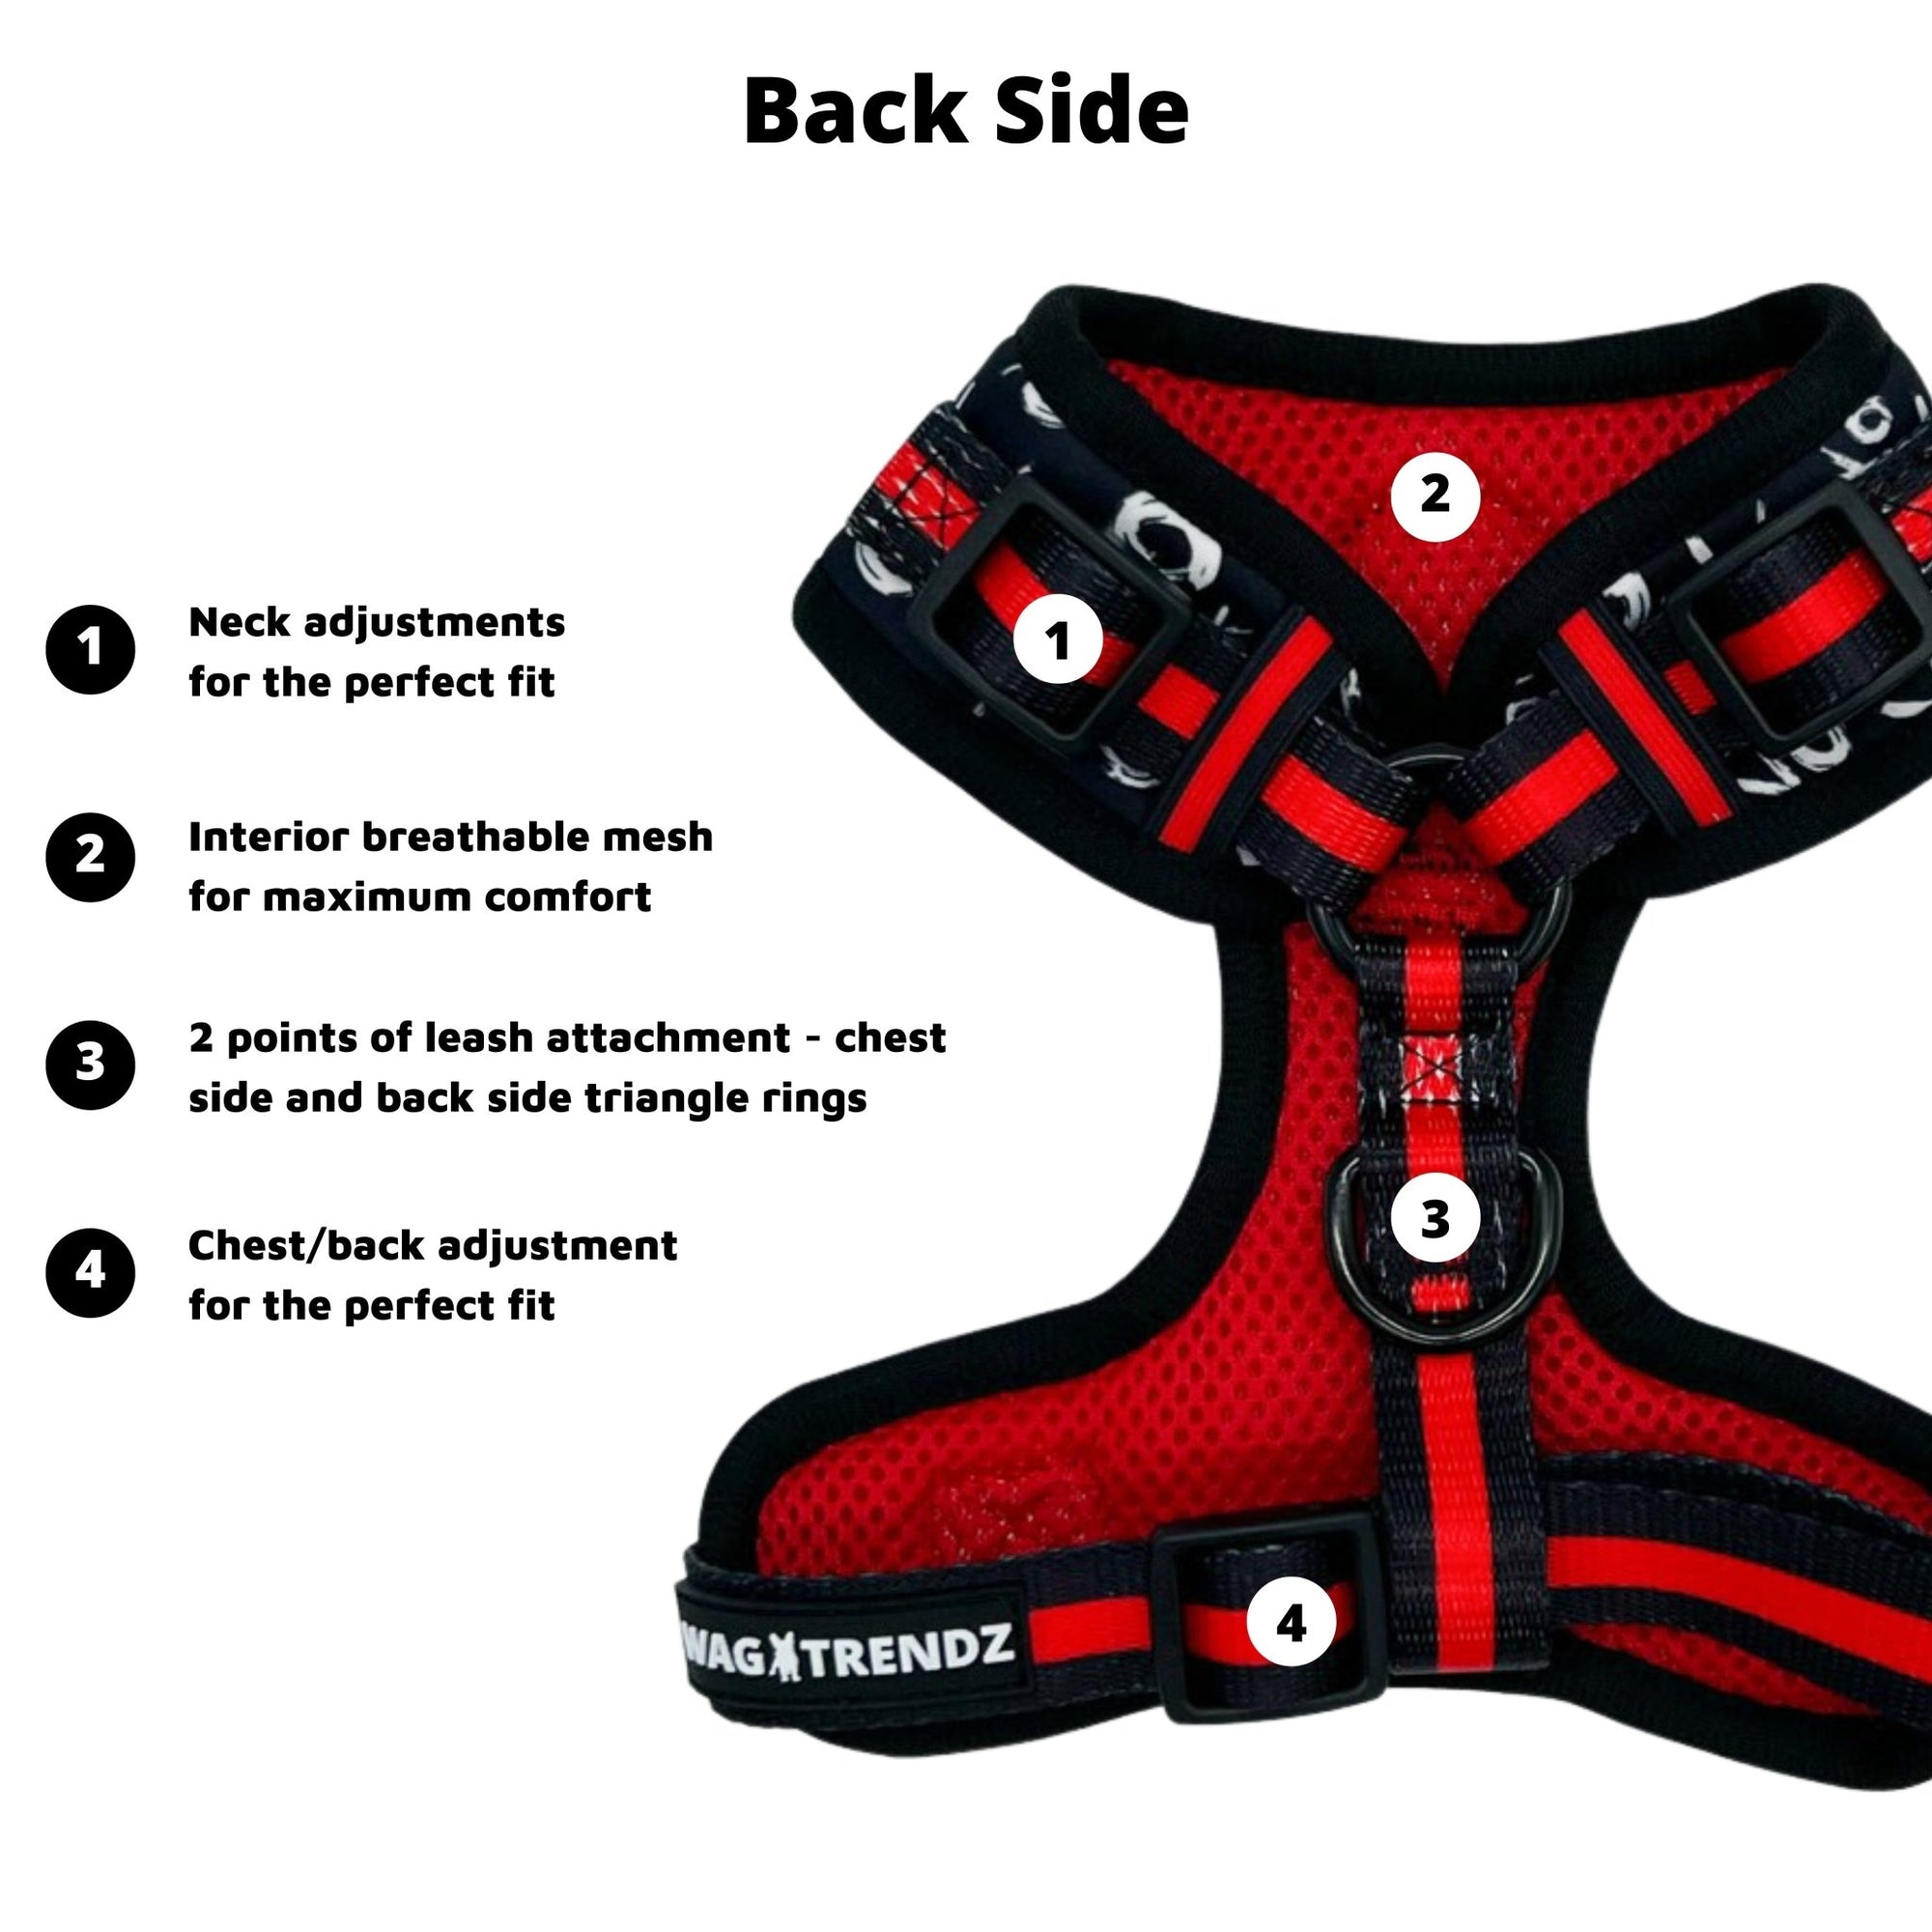 Dog Harness Vest - Adjustable - Front Clip - Dog Harness Vest in black and white XO&#39;s with bold red accents - product feature captions - back side - against solid white background - Wag Trendz